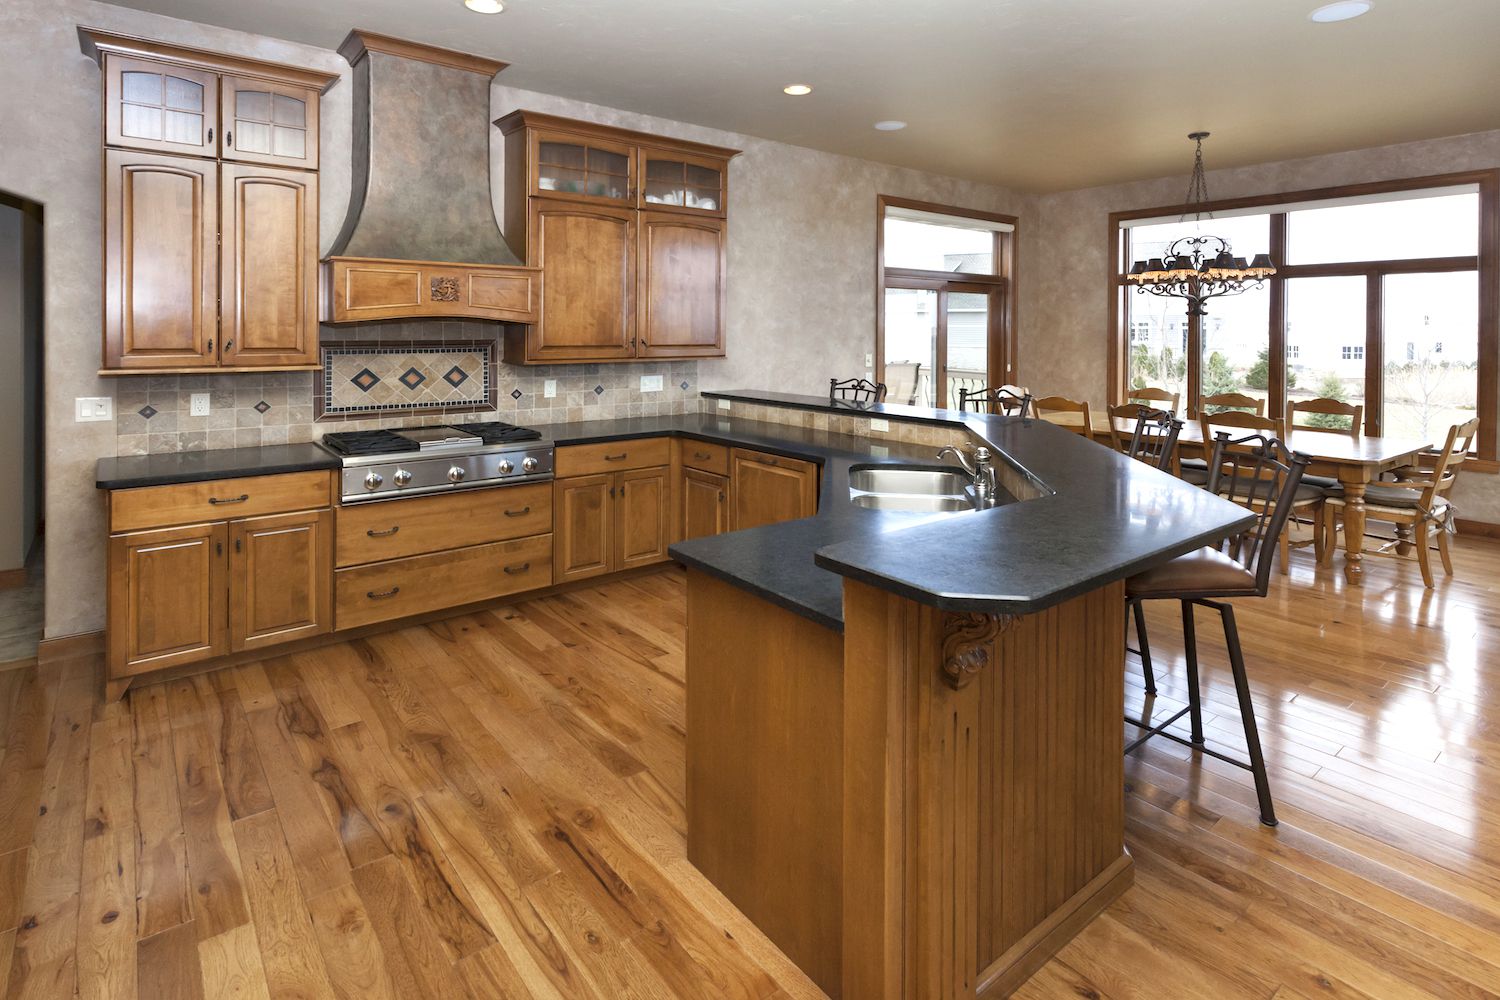 Creatice What Is The Best Countertop Color For Dark Cabinets with Simple Decor